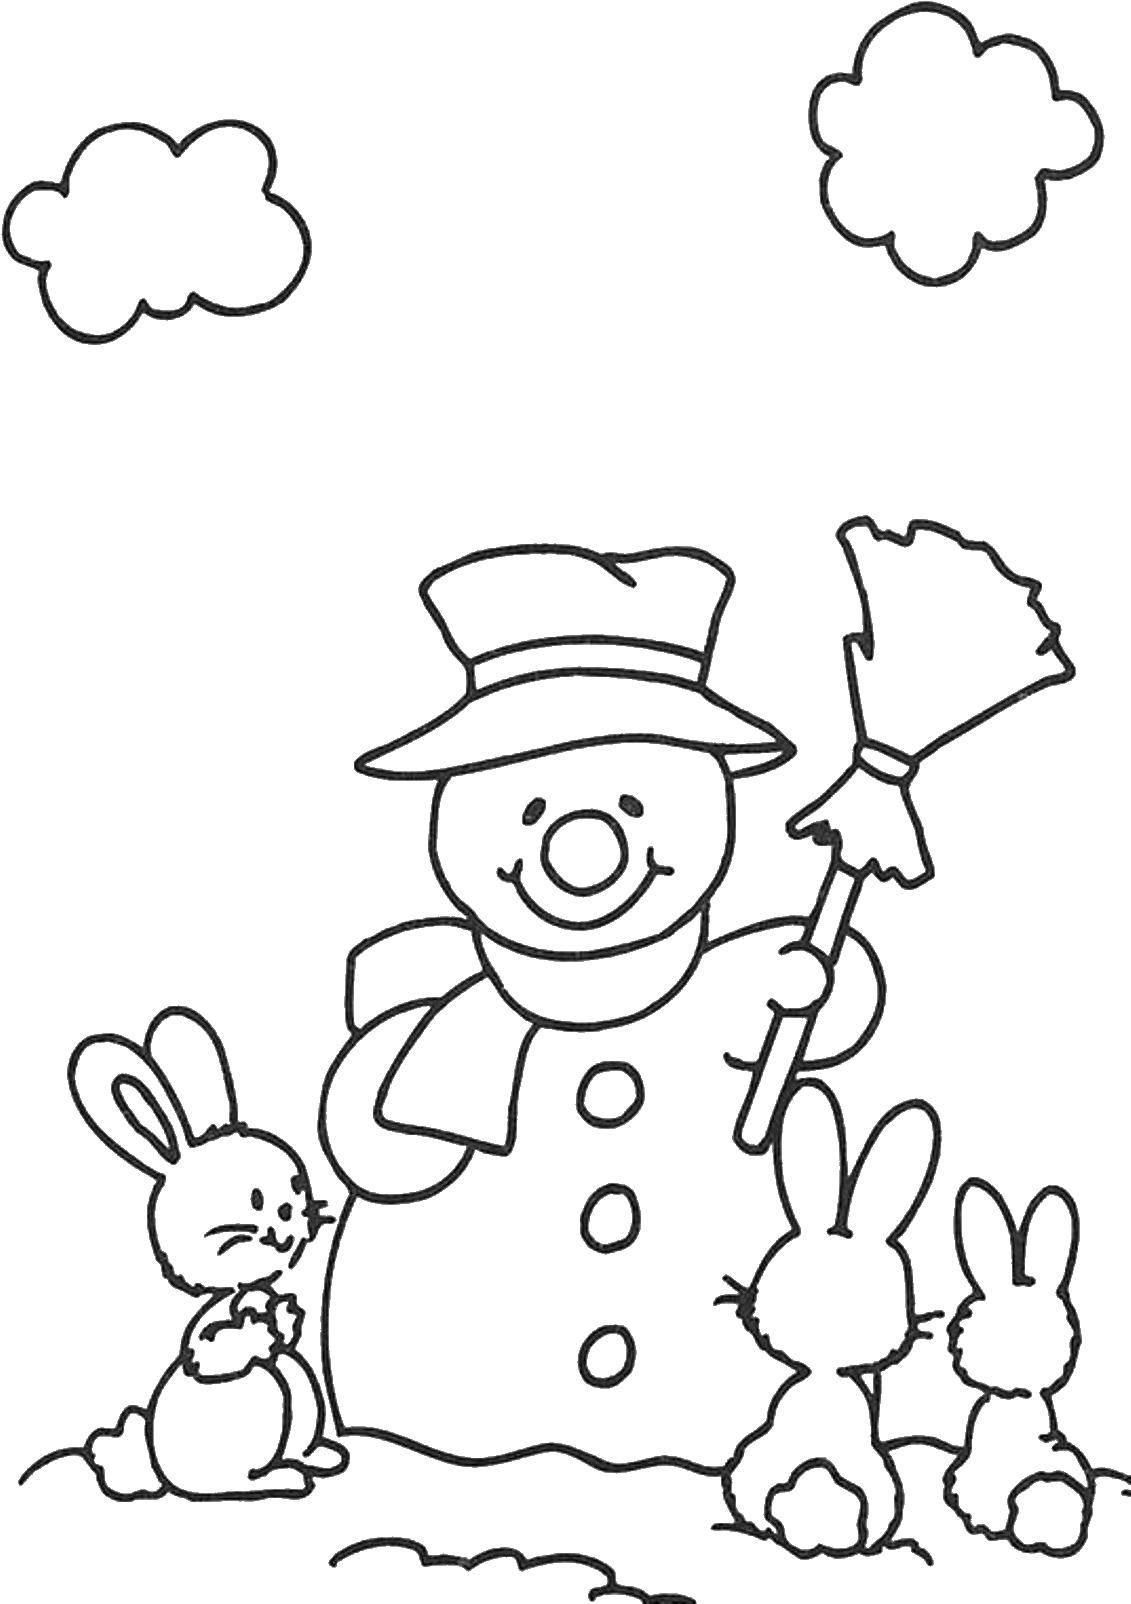 Coloring Snegovichok with leverets. Category Animals. Tags:  Animals, Bunny.